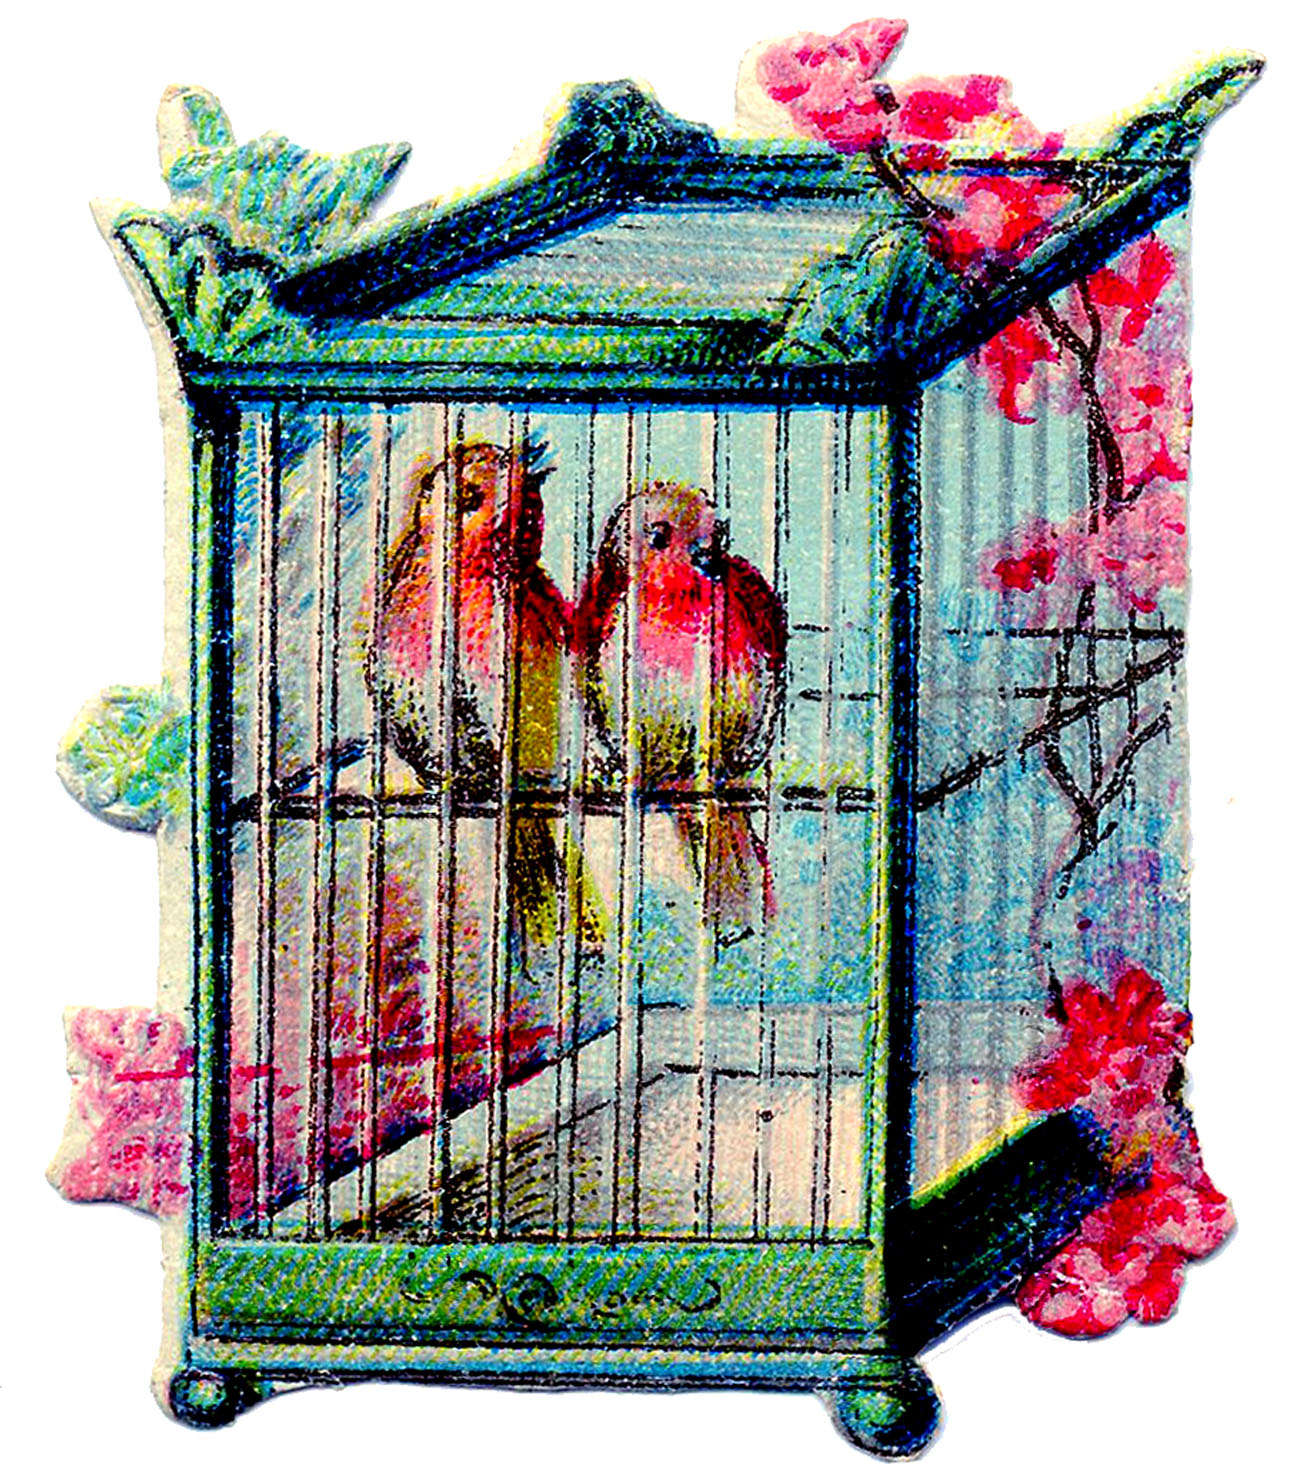 Vintage Clip Art   Pretty Birds In Asian Style Bird Cage   The